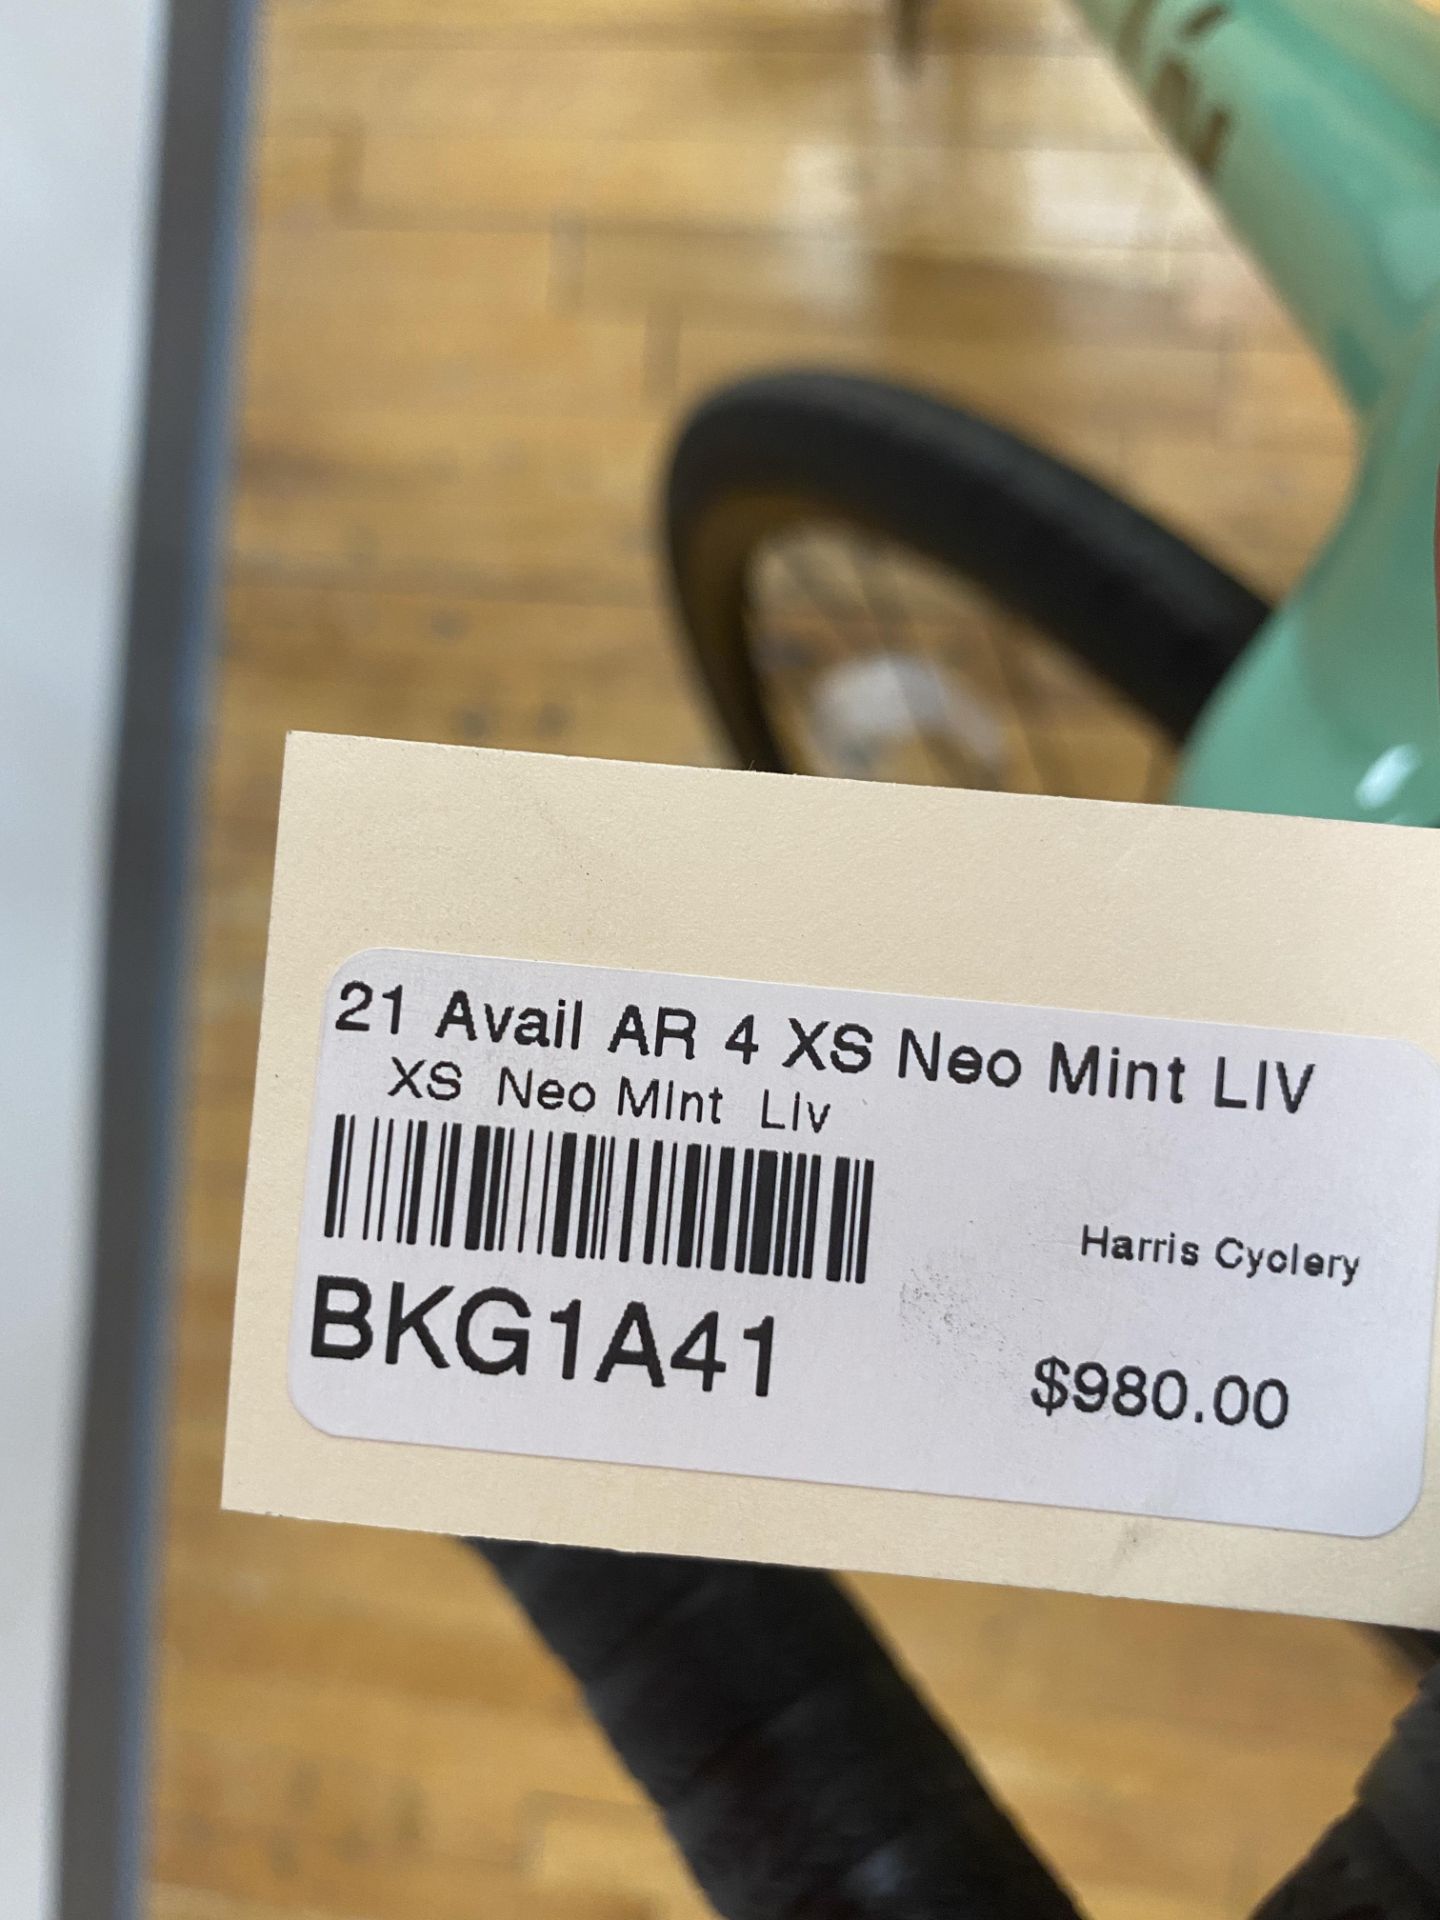 LIV Avail AR 4XS Neo Mint $980 - Image 2 of 2